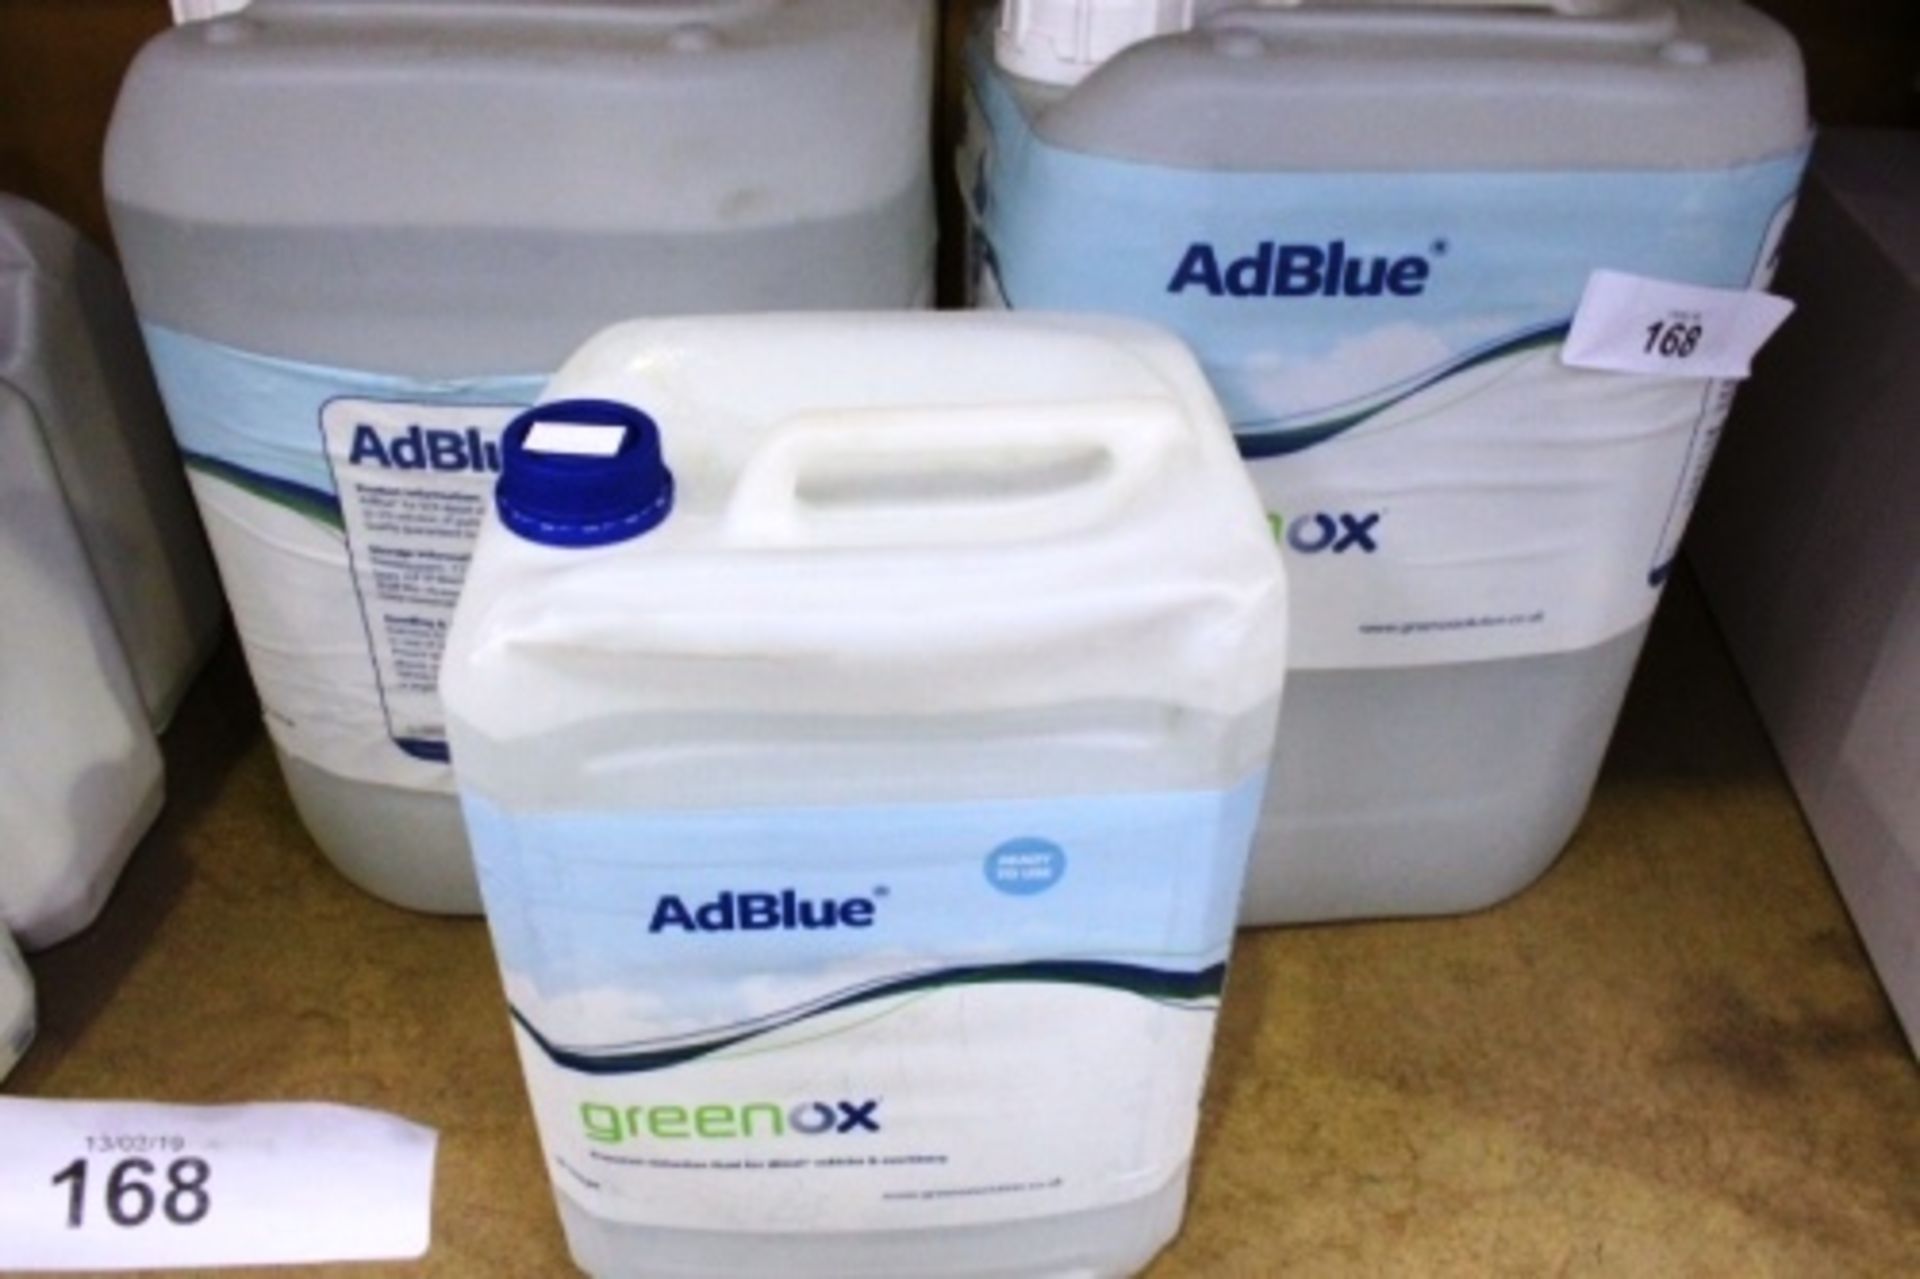 2 x 25ltr bottles of Greenox Adblue solution together with 1 x 10ltr bottle of Adblue - New (ESB11)